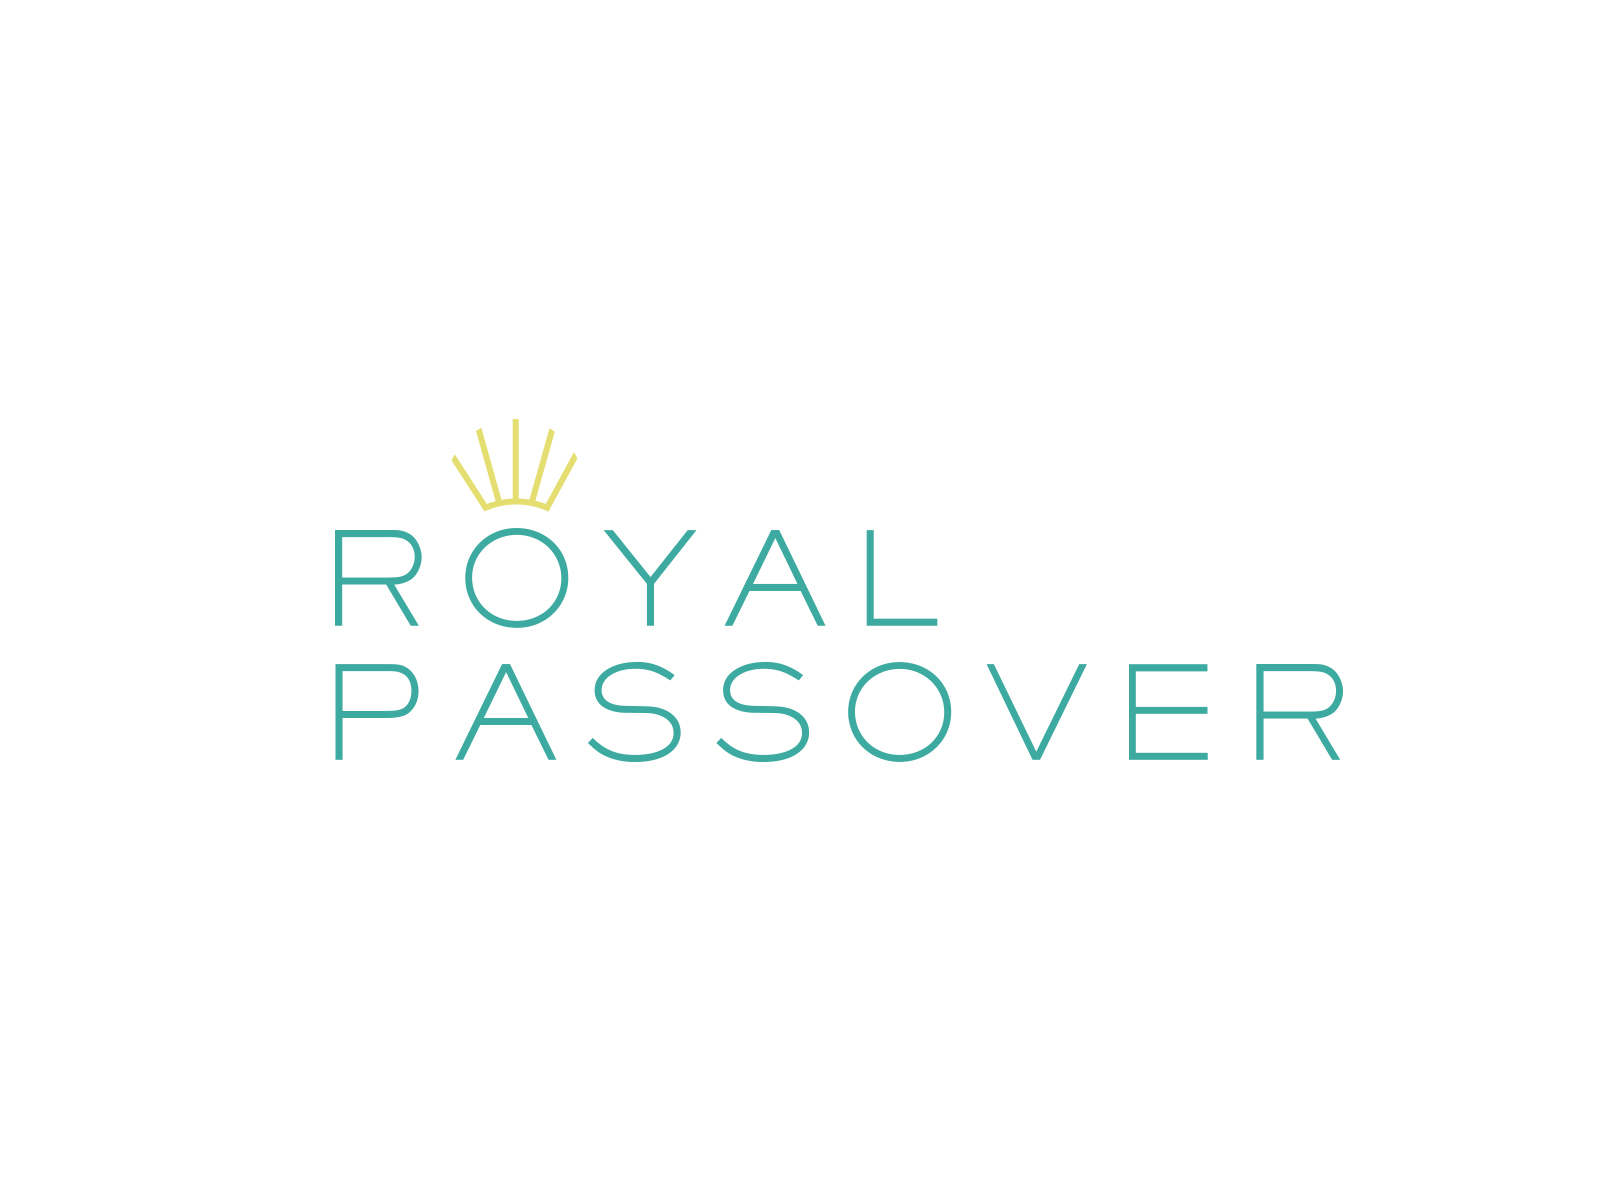 Royal Passover By Chaya Teitelbaum On Dribbble 